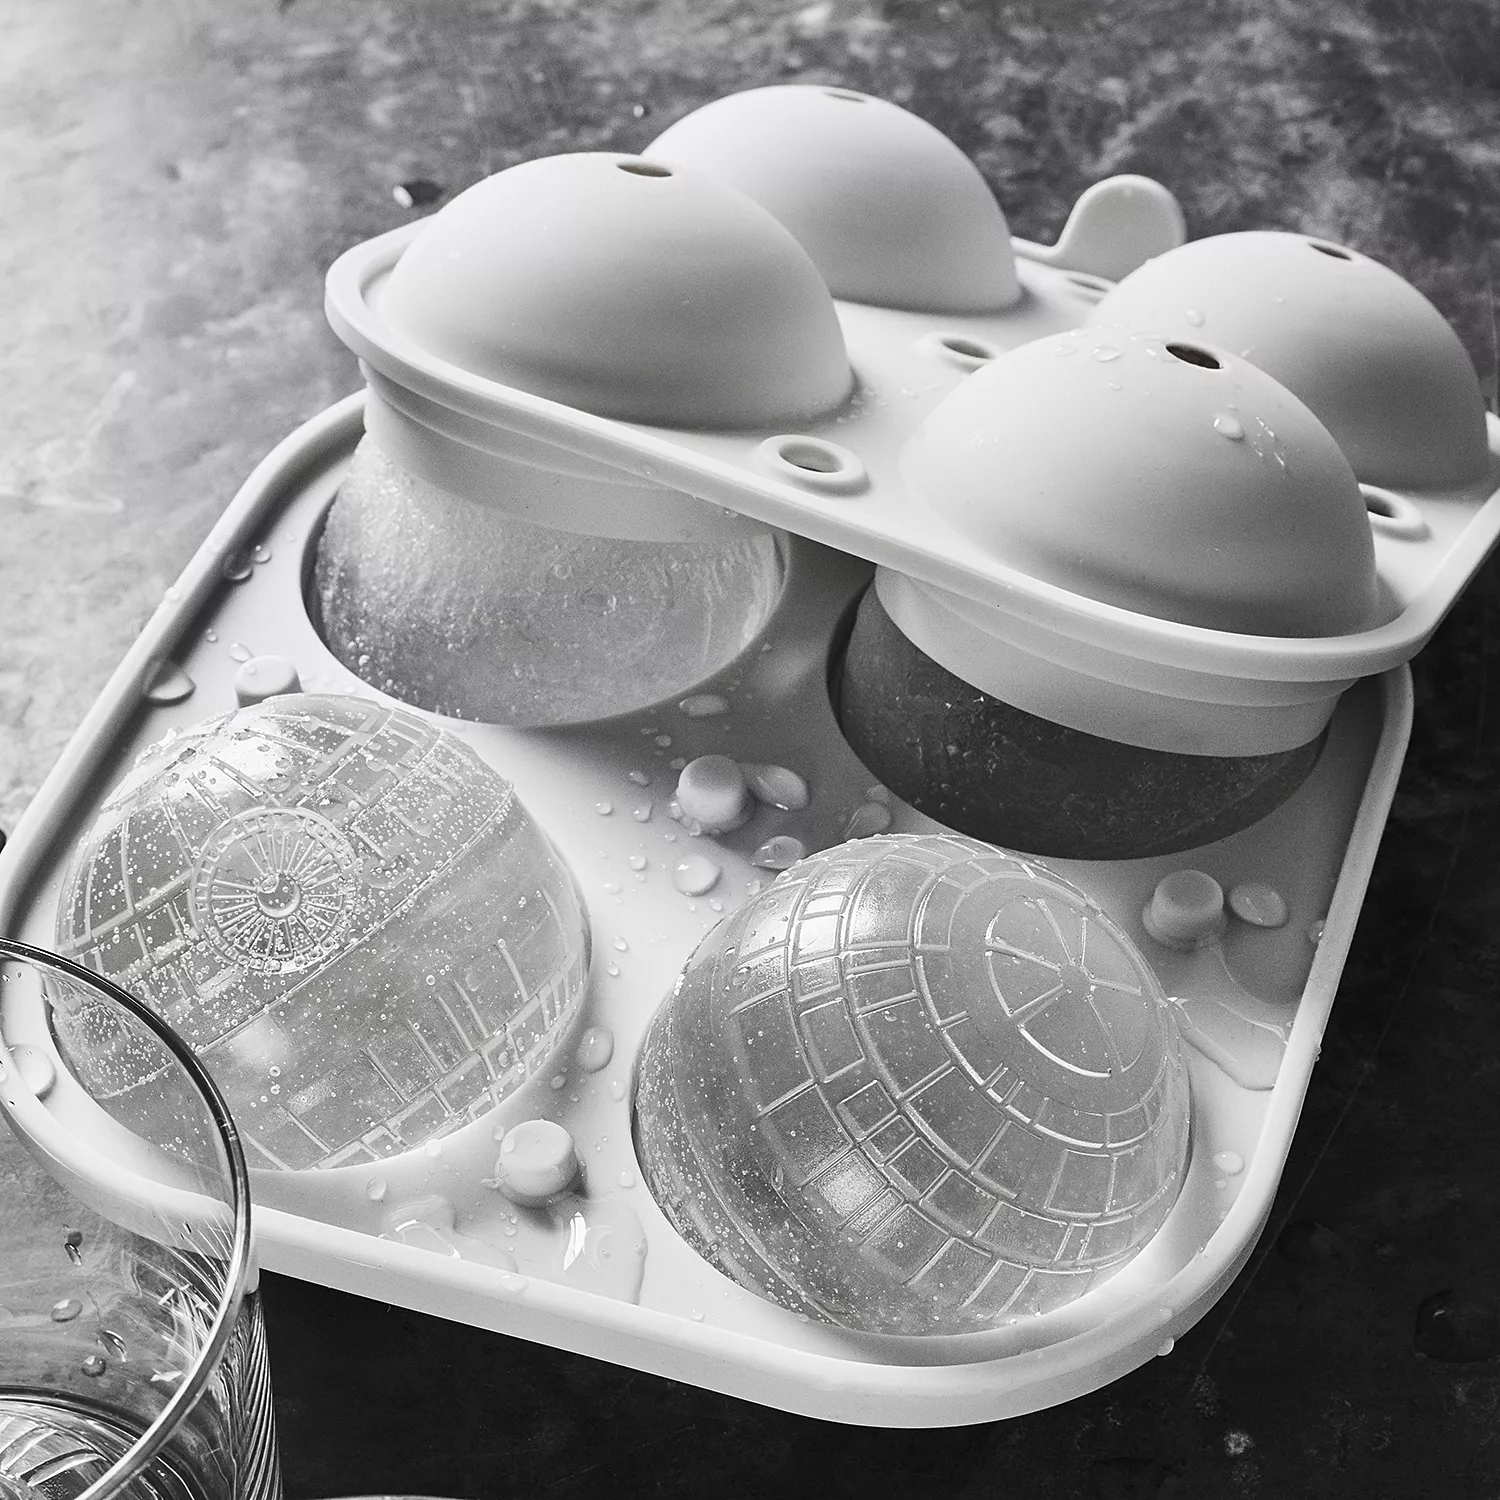 Star Wars Death Star Silicone Ice Cube Mold For Cocktails Kitchen, Free  Shipping